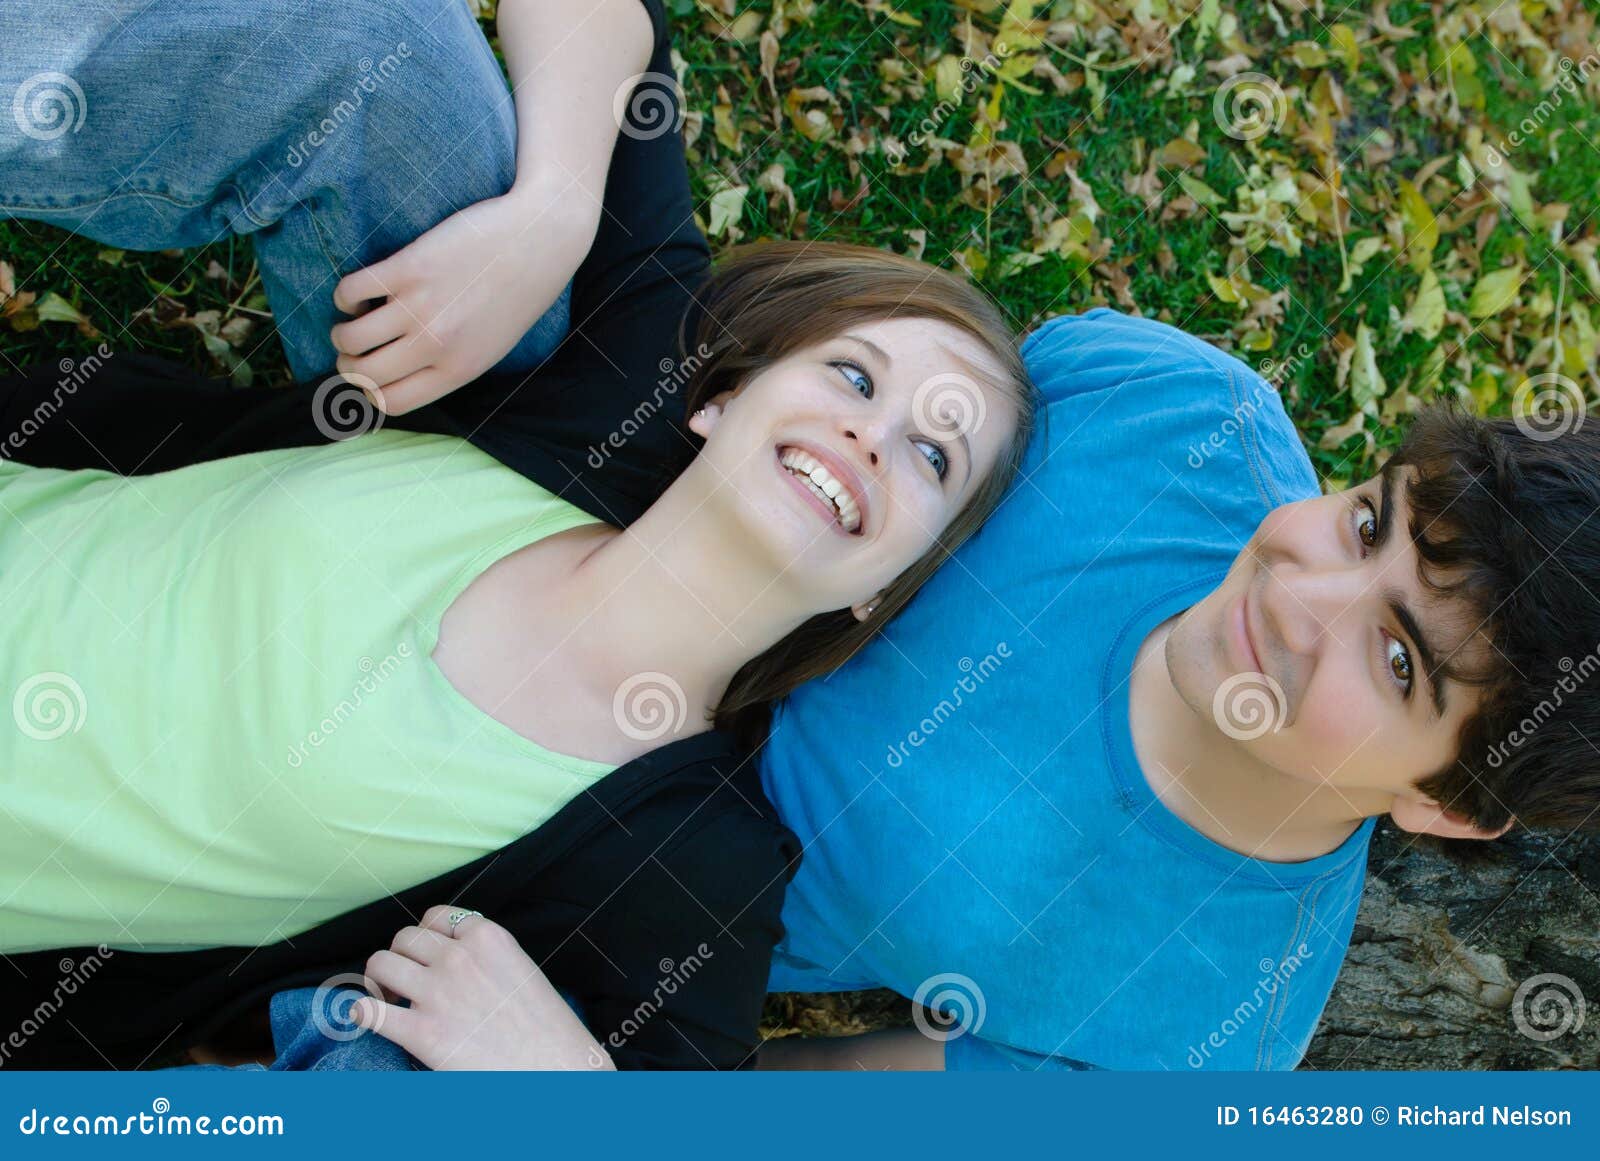 Relaxing Teen Couple Stock Photo Image Of Smiling Affect